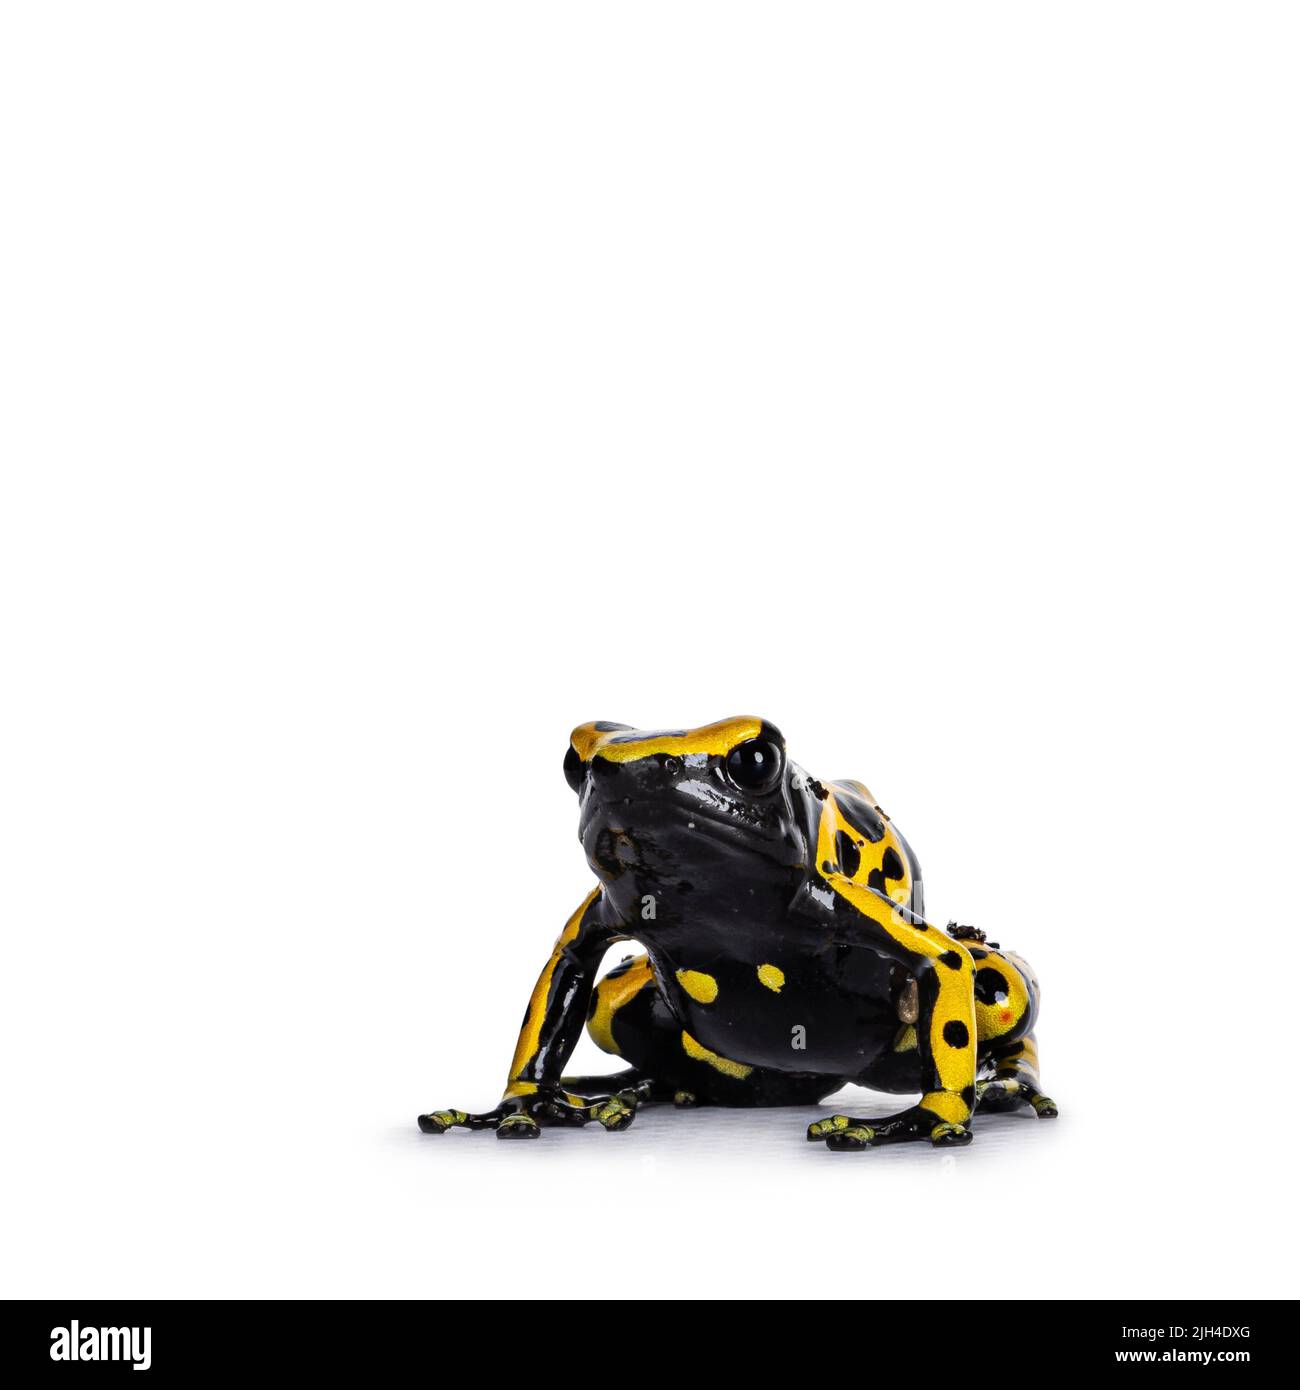 Colorful Yellow-banded Poison Dart Frog aka Dendrobates leucomelas, sitting up facing front. Isolated on a white background. Stock Photo